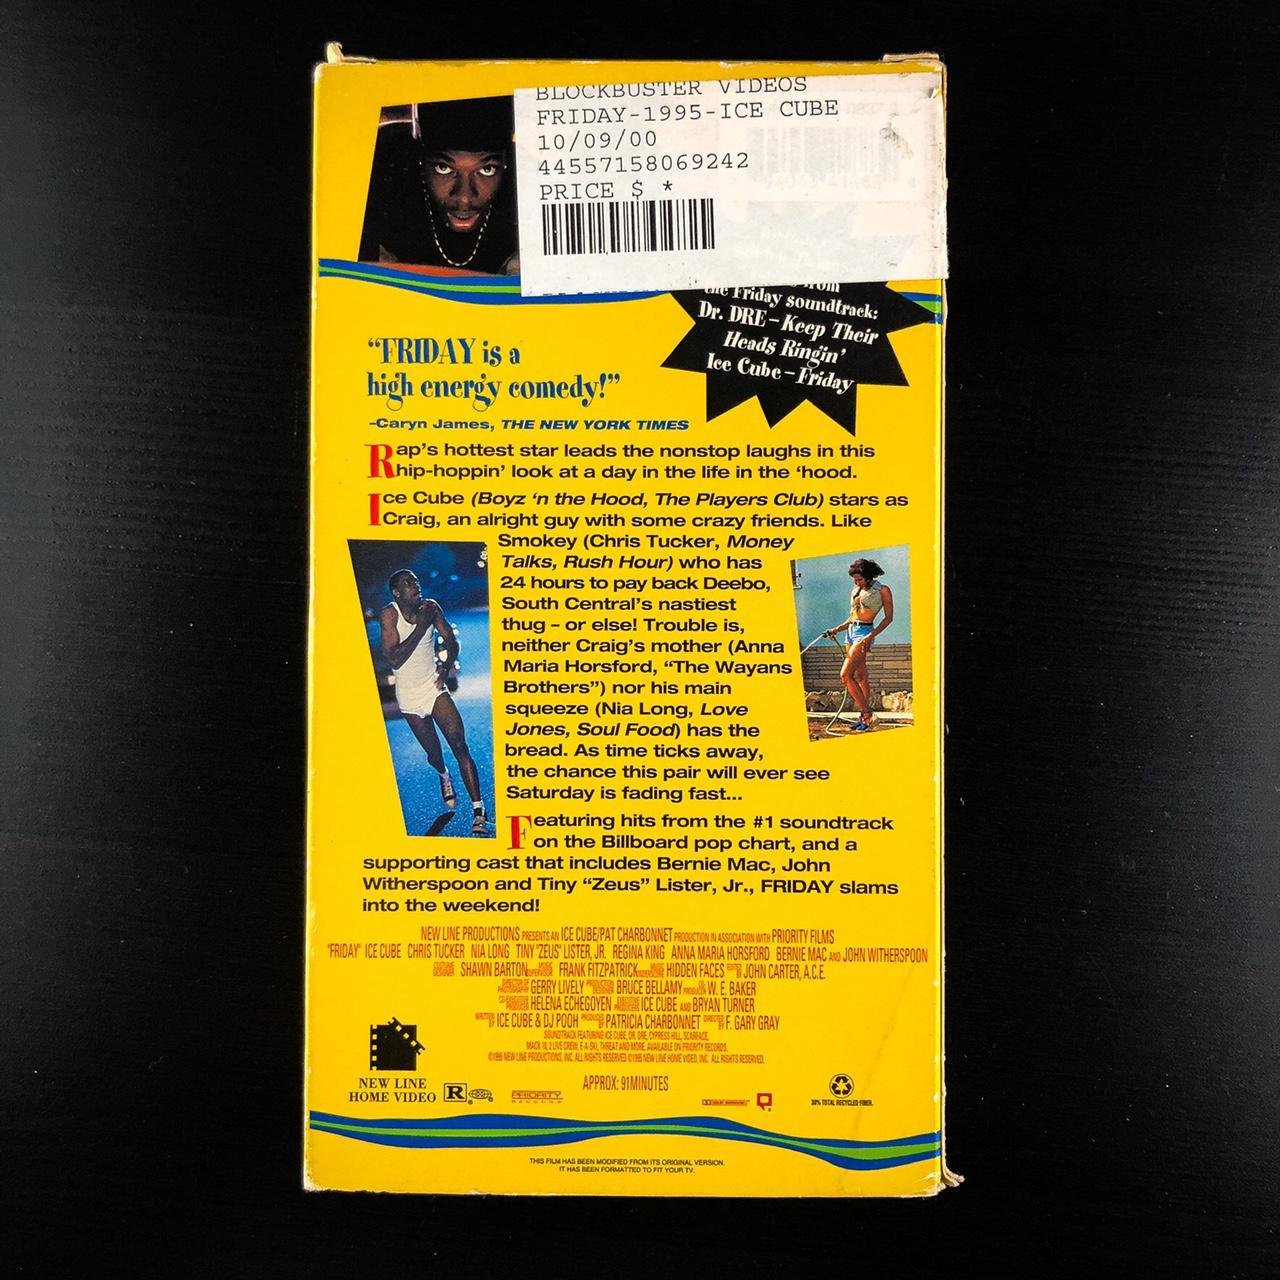 Friday - VHS Film Classic Comedy Movie! Starring - Depop